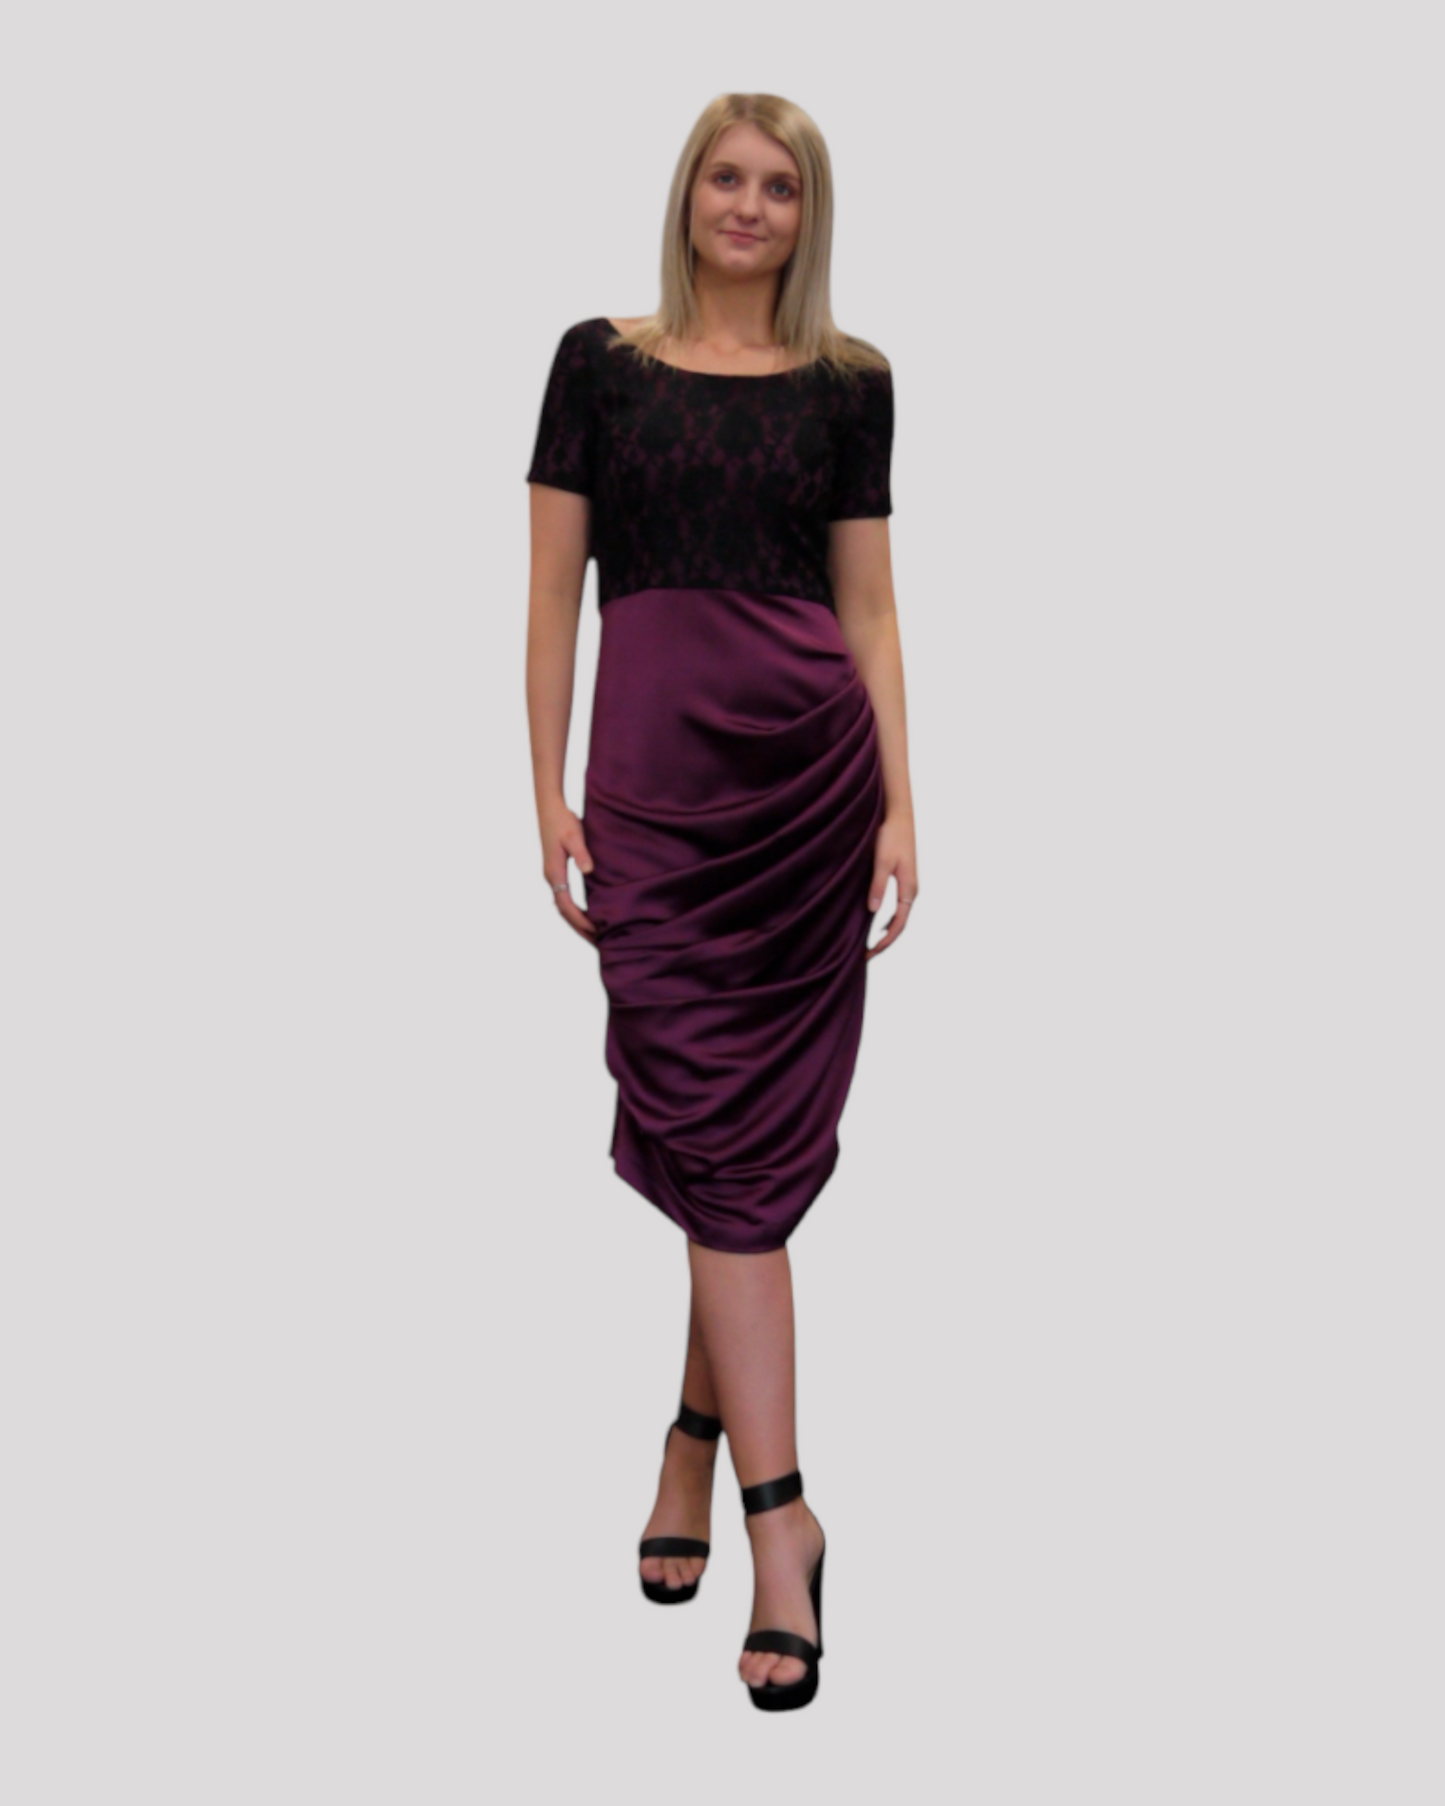 Cathy Purple and Lace Cocktail Dress